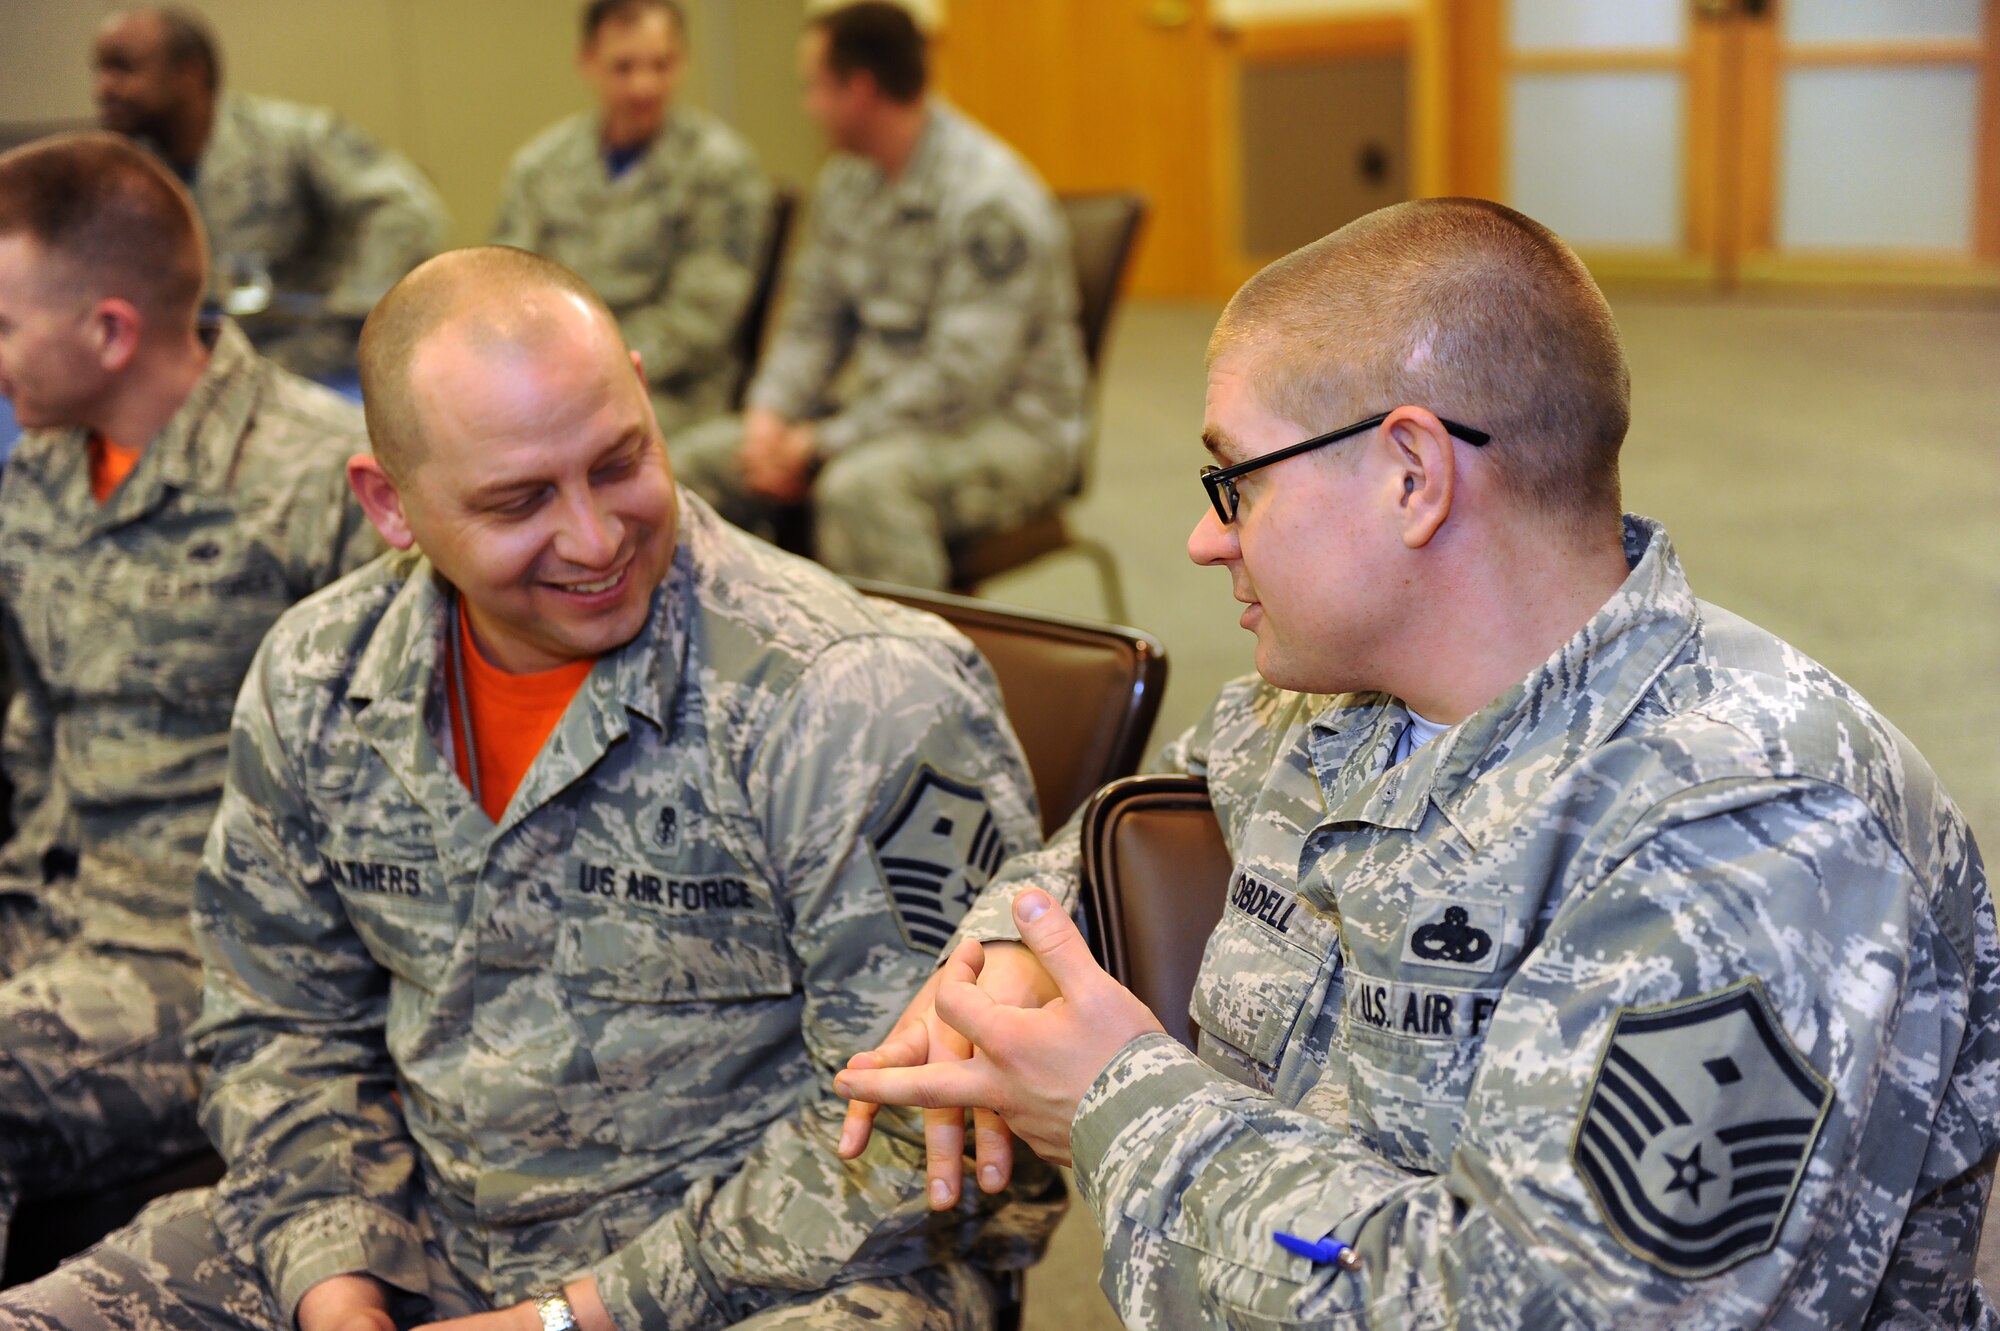 U.S. Air Force Master Sgt. Michael Mathers, left, and Master Sgt. Corey Lobdell, both Whiteman first sergeants, practice a listening and communication skills exercise during Profession of Arms Center of Excellence (PACE) training at Whiteman Air Force Base, Mo., March 4, 2016. PACE was designed to teach leaders how to embody a higher level of professionalism and communication to lead more effectively. (U.S. Air Force photo by Airman 1st Class Michaela R. Slanchik)